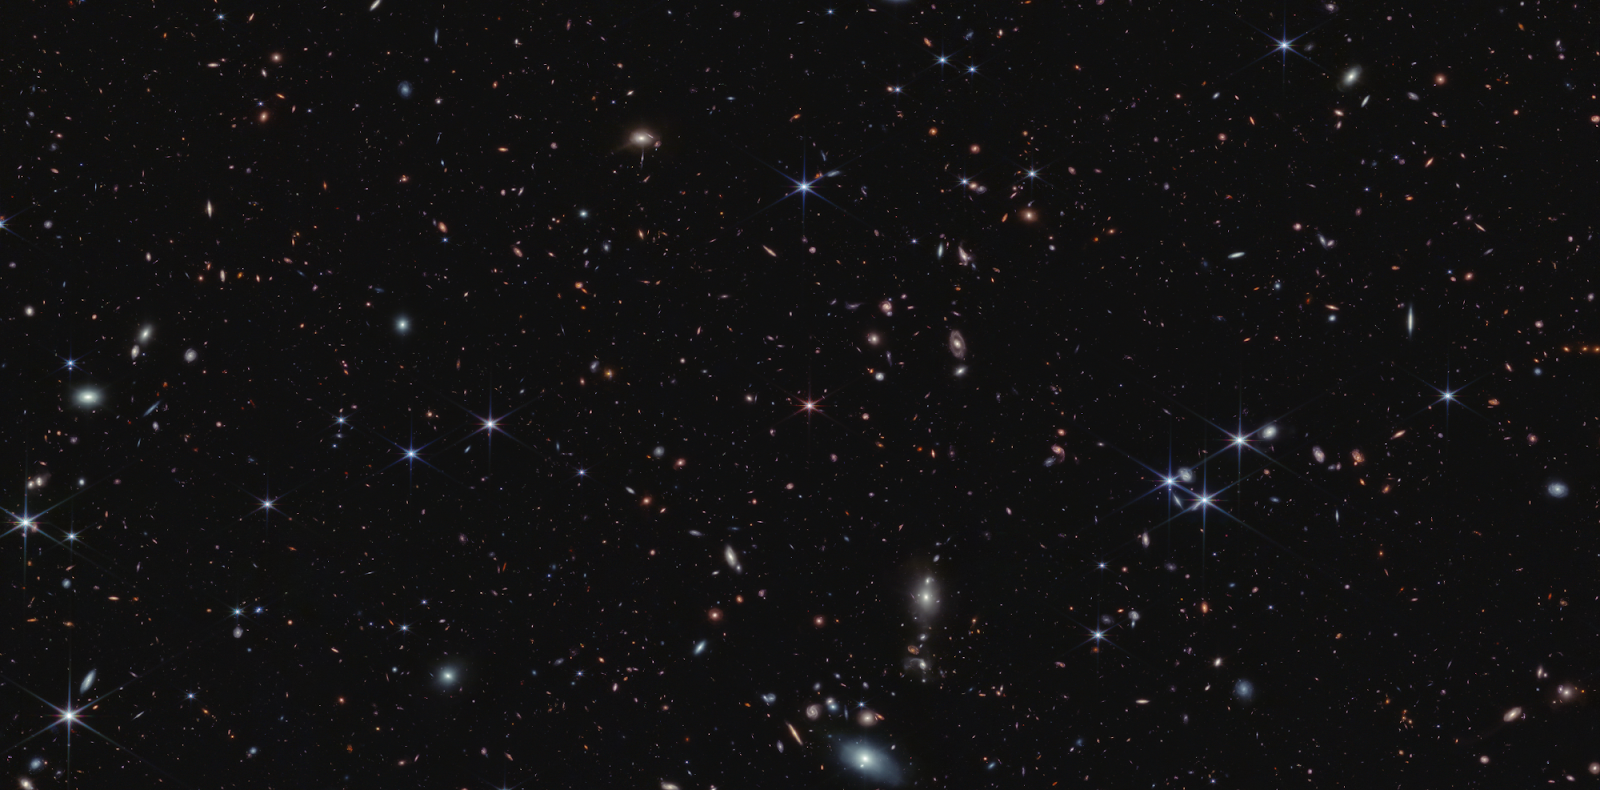 A large cluster of galaxies in the sky.